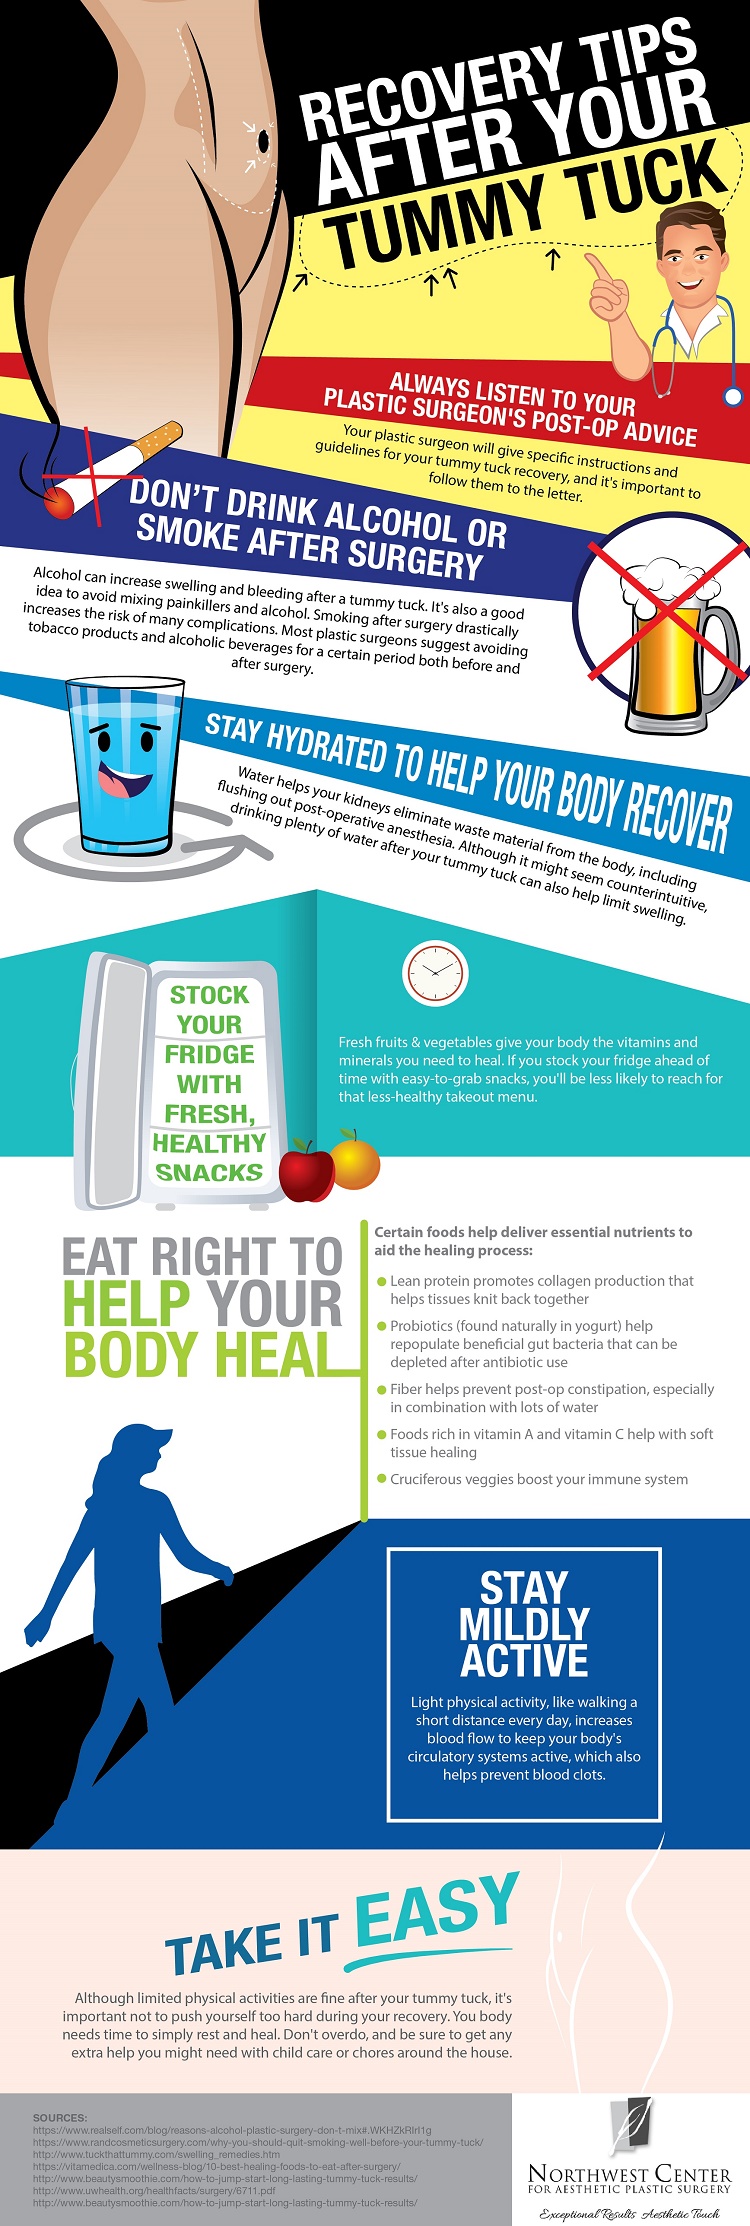 Recovery Tips After Your Tummy Tuck [Infographic] - Northwest Center for  Aesthetic Plastic Surgery